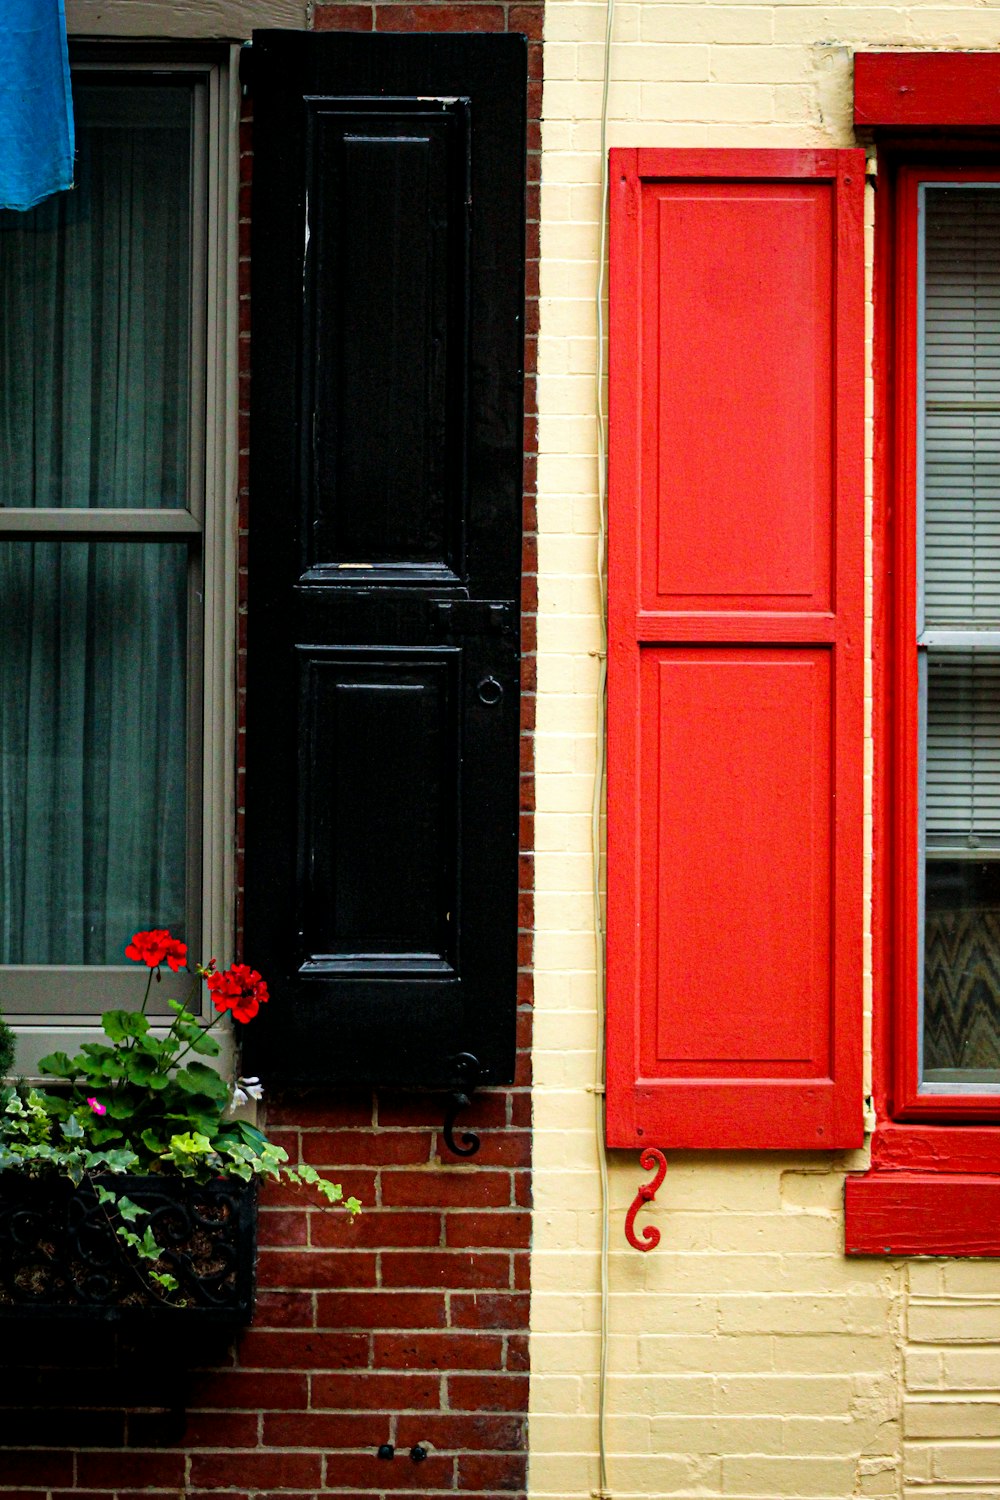 a brick building with a red window and a black shutter